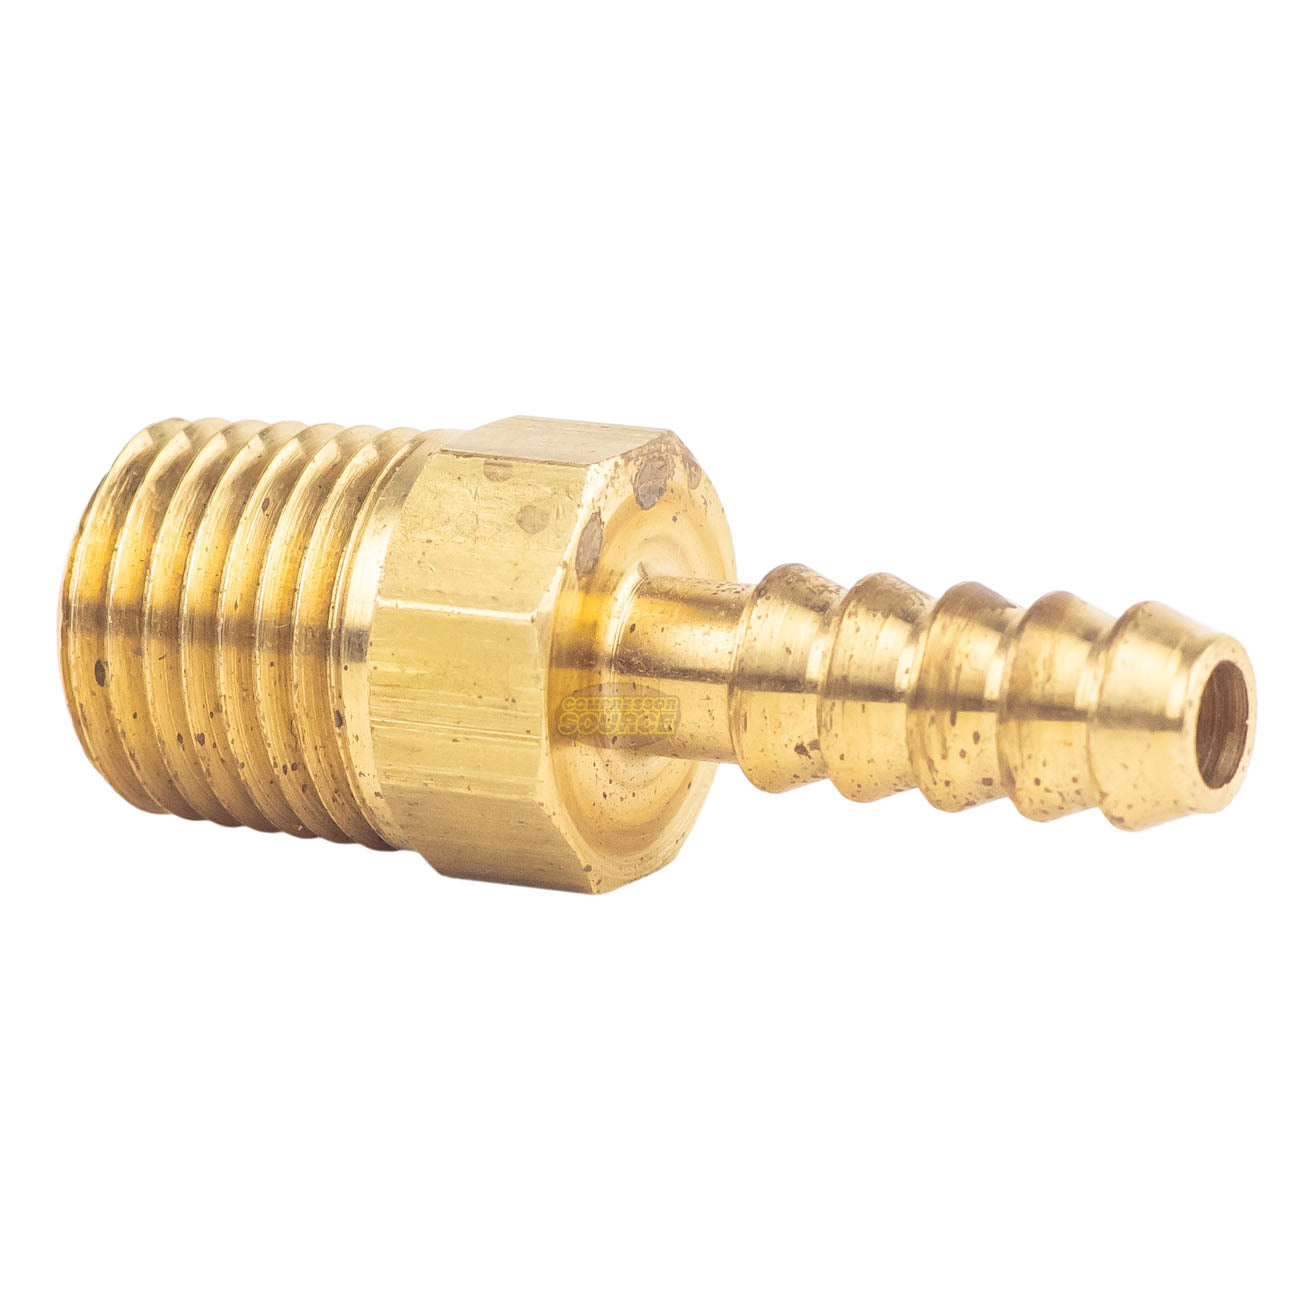 Brass Hose Barb 1/4" Male NPT for 1/4" ID Hoses Barbed Fitting Air Fuel Water